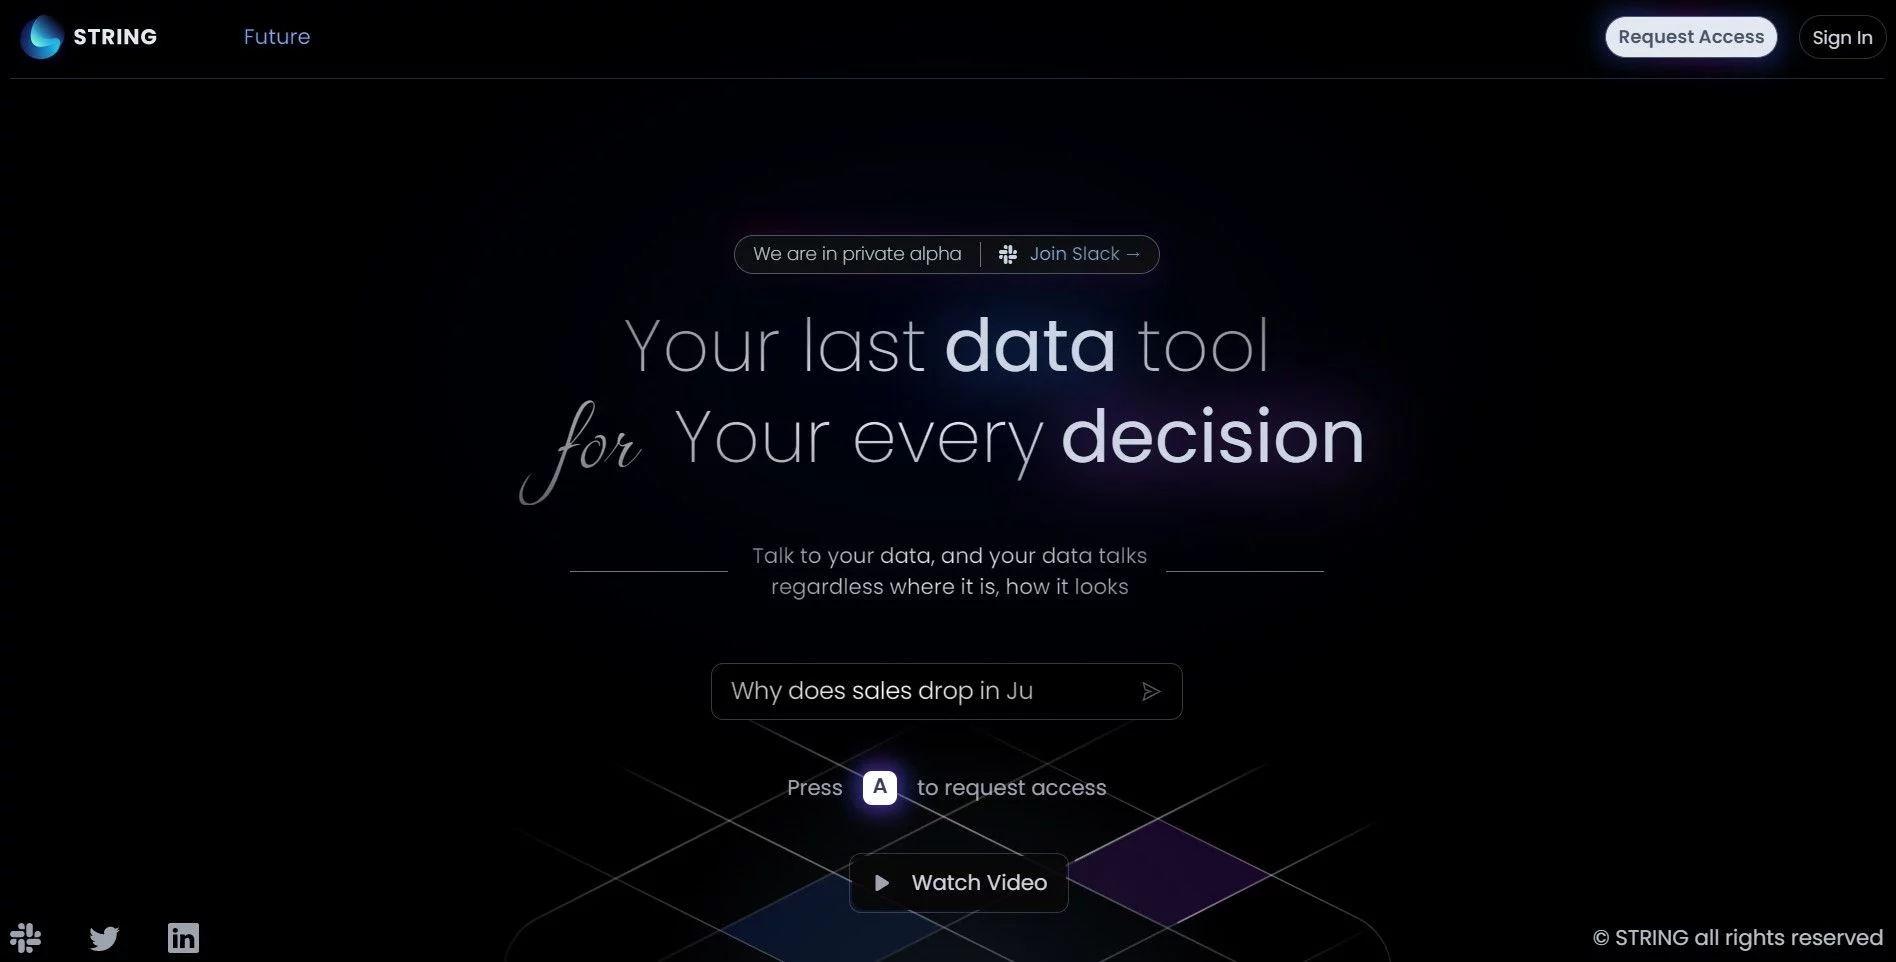  Your last data tool for your every decision.